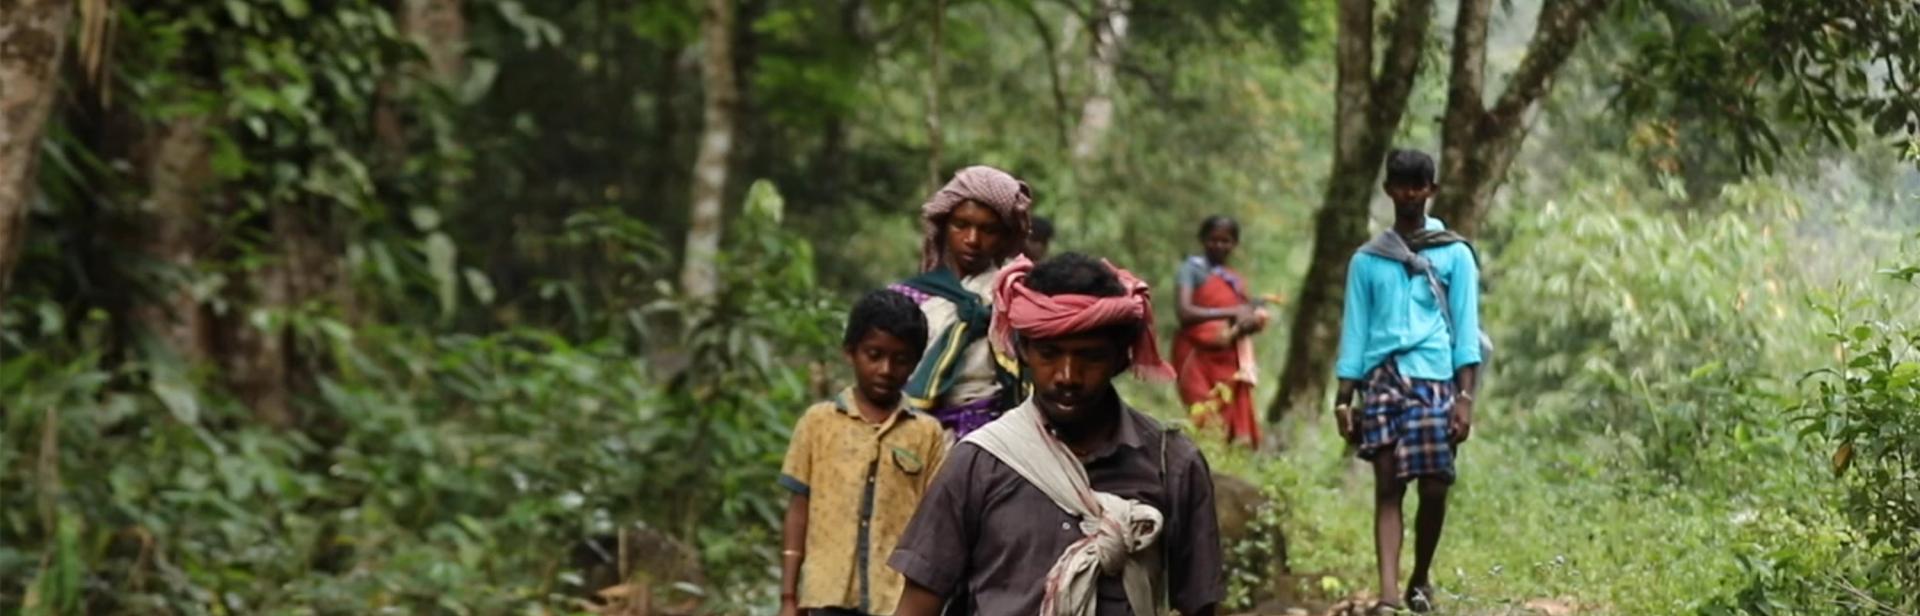 The Kadar tribe in Anamalai Forest